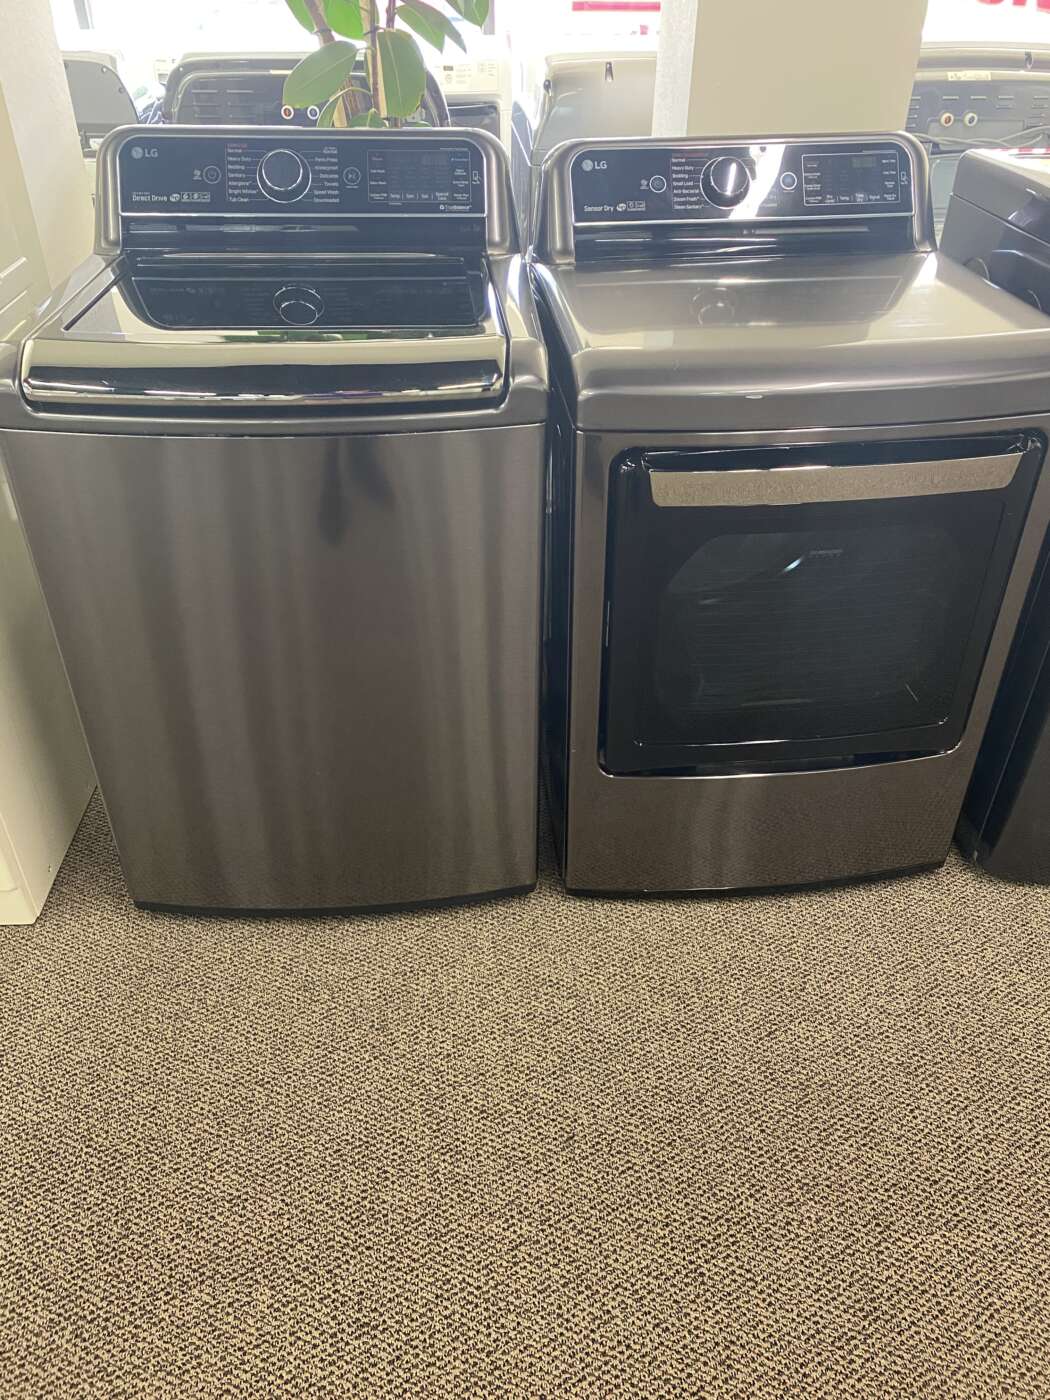 Reconditioned LG 5.2 Cu. Ft. Top-Load Washer and 7.3 Cu. Ft. Electric Dryer Set